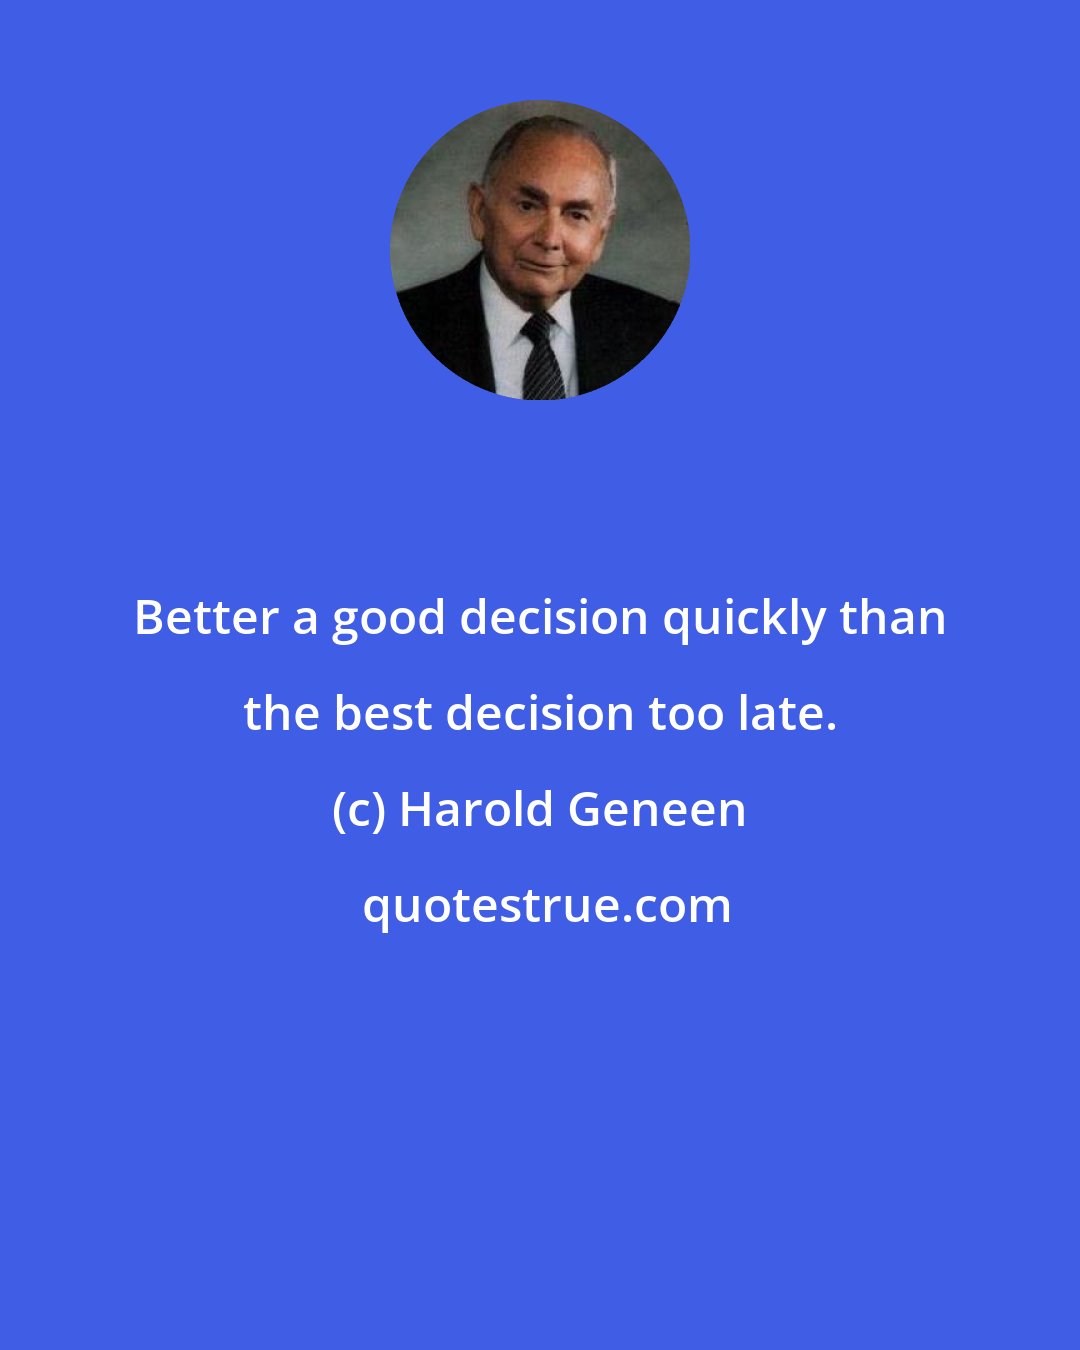 Harold Geneen: Better a good decision quickly than the best decision too late.